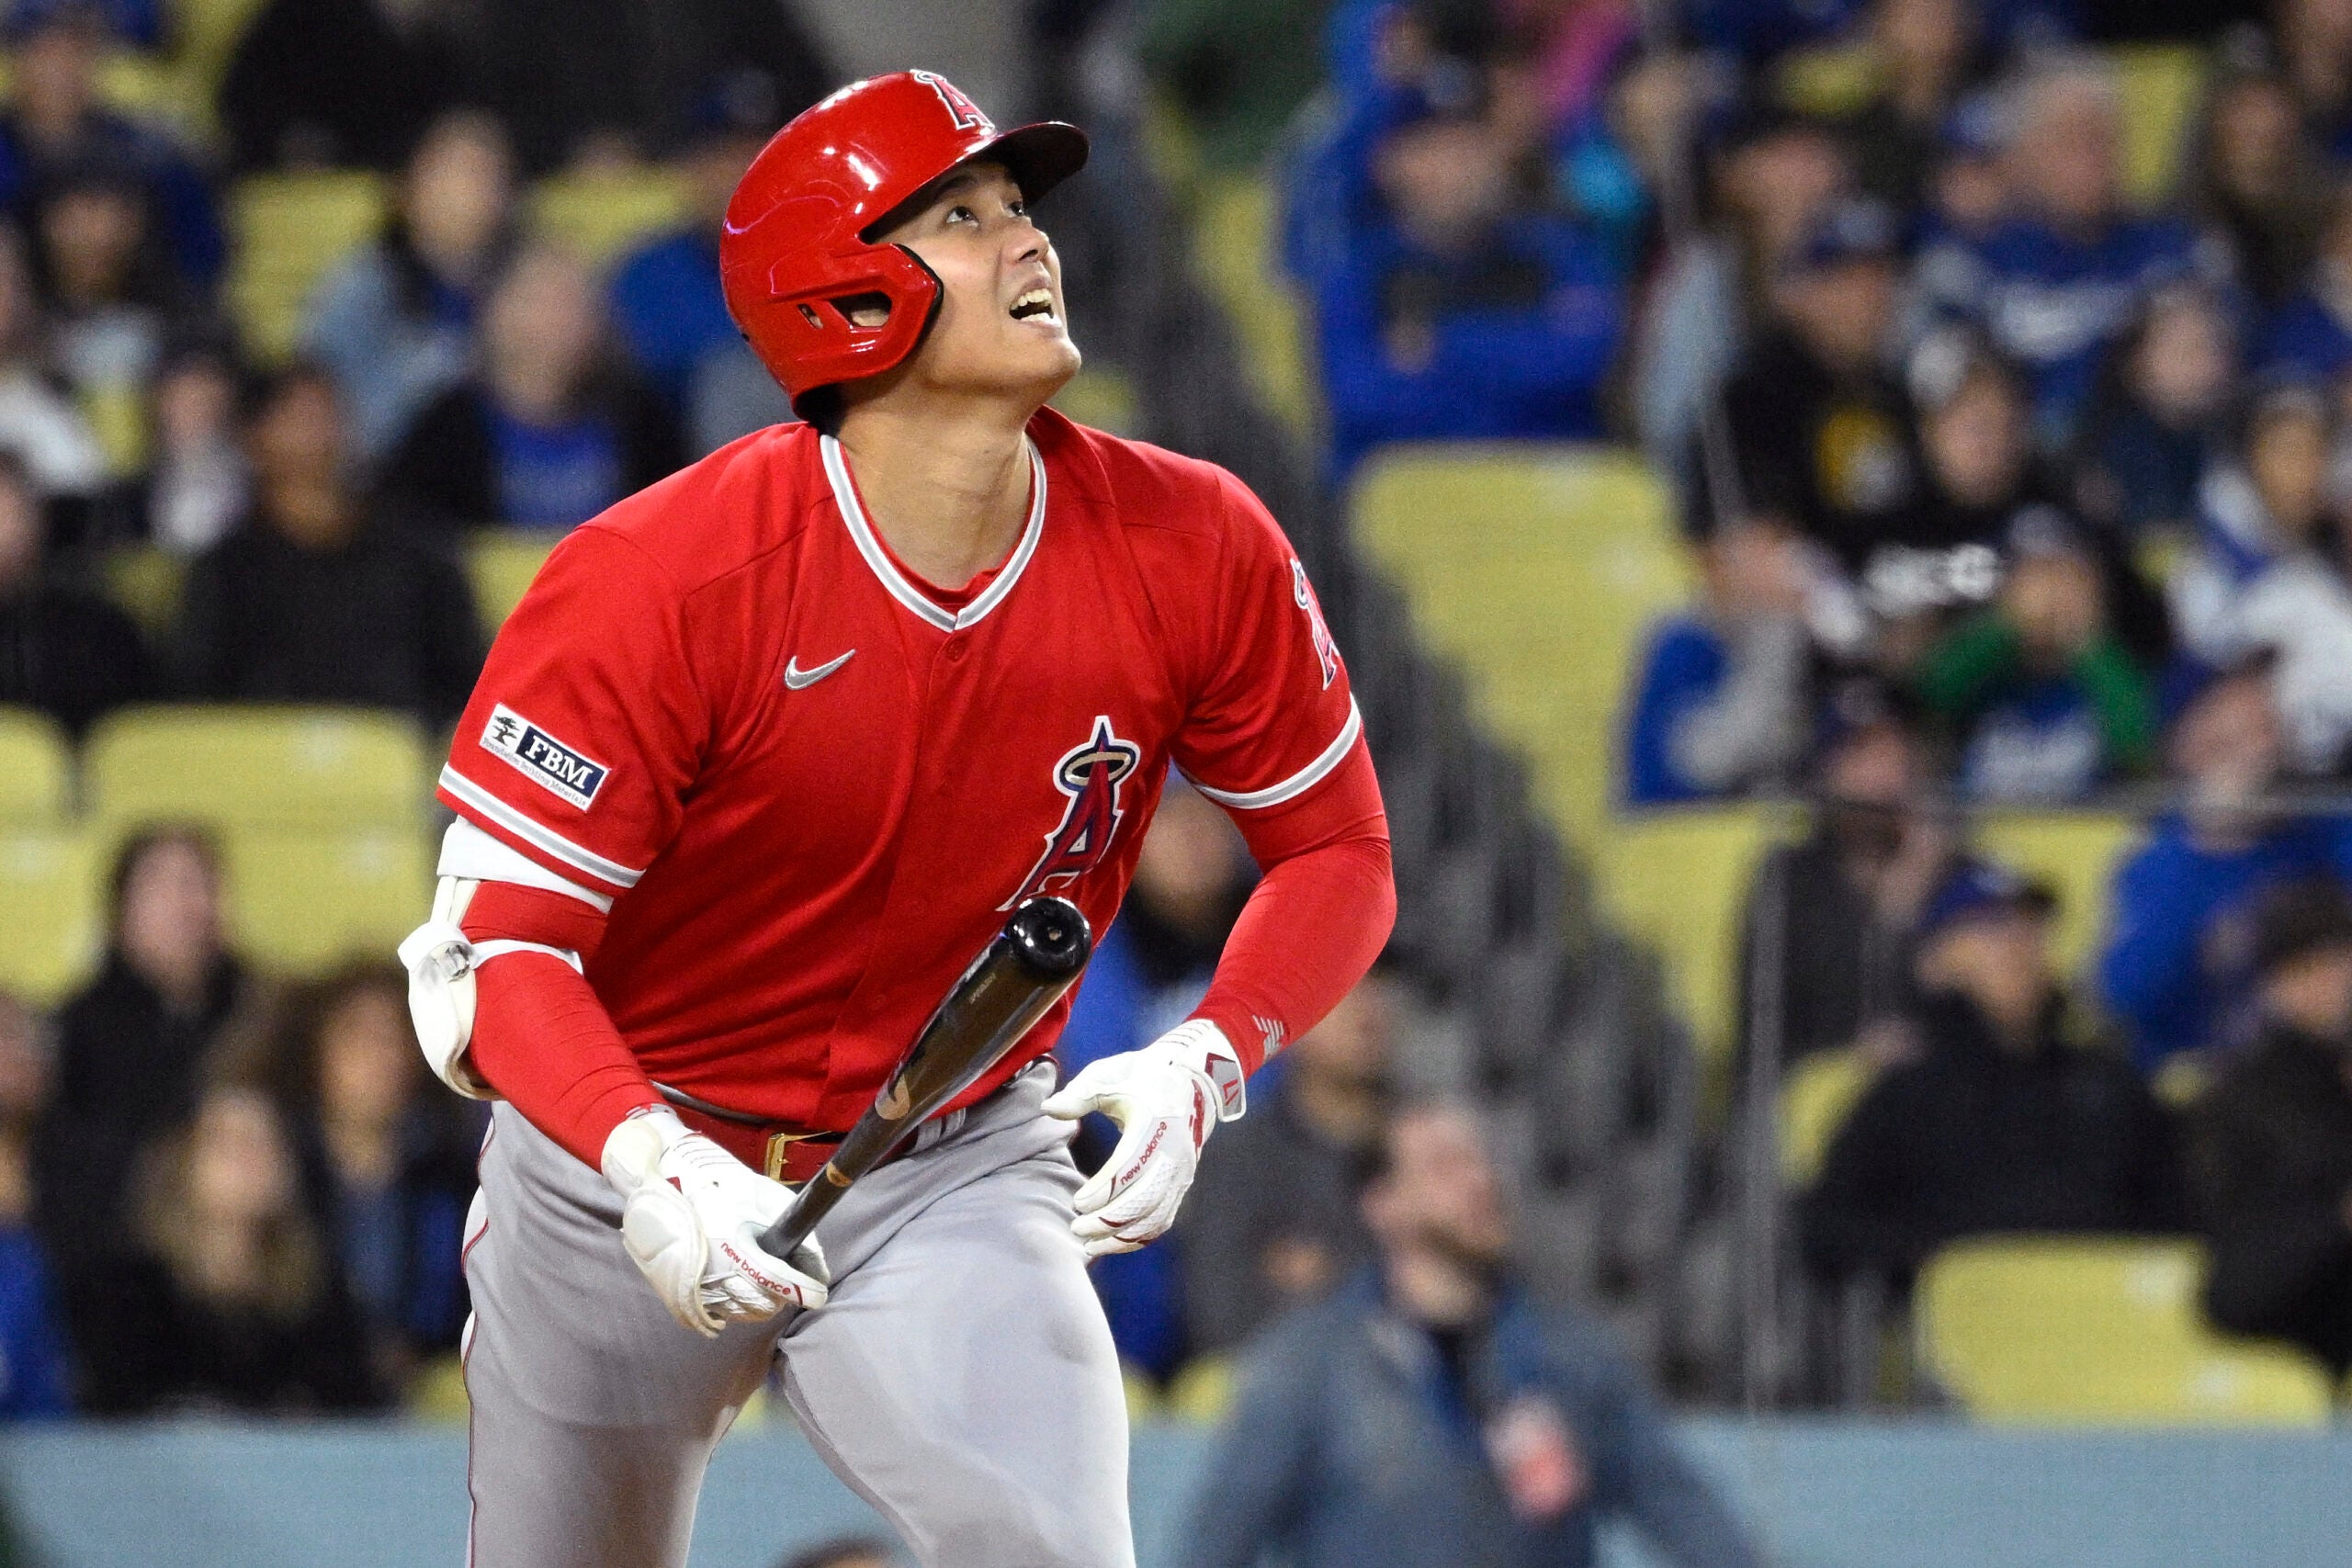 Shohei Ohtani is one of the possible mlb free agents after this season.